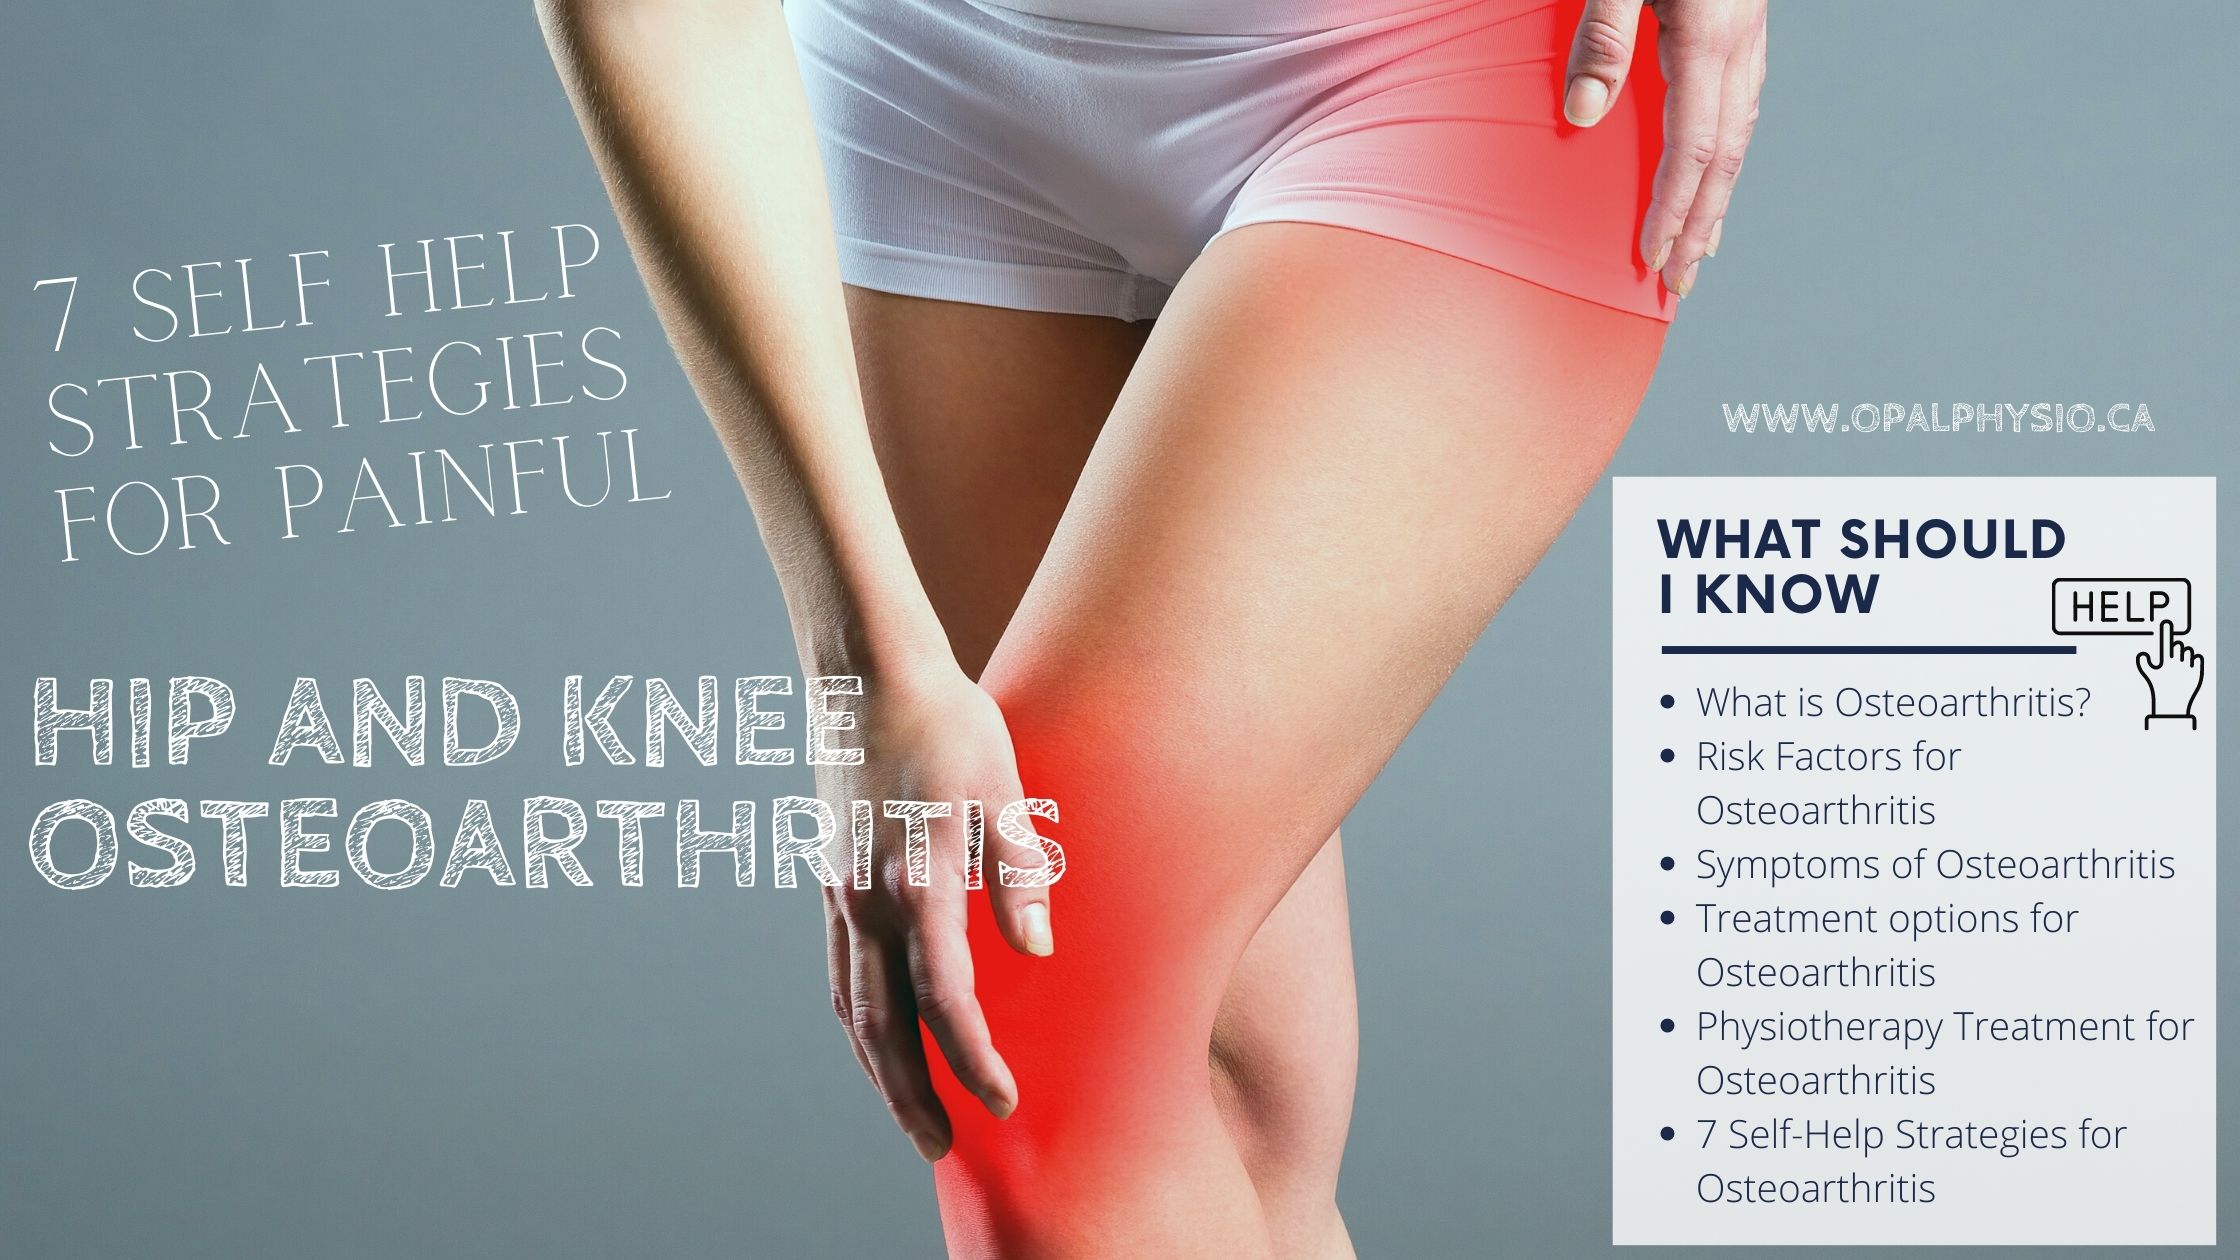 7 Self Help strategies for Painful Hip and Knee Osteoarthritis | Opal Physio